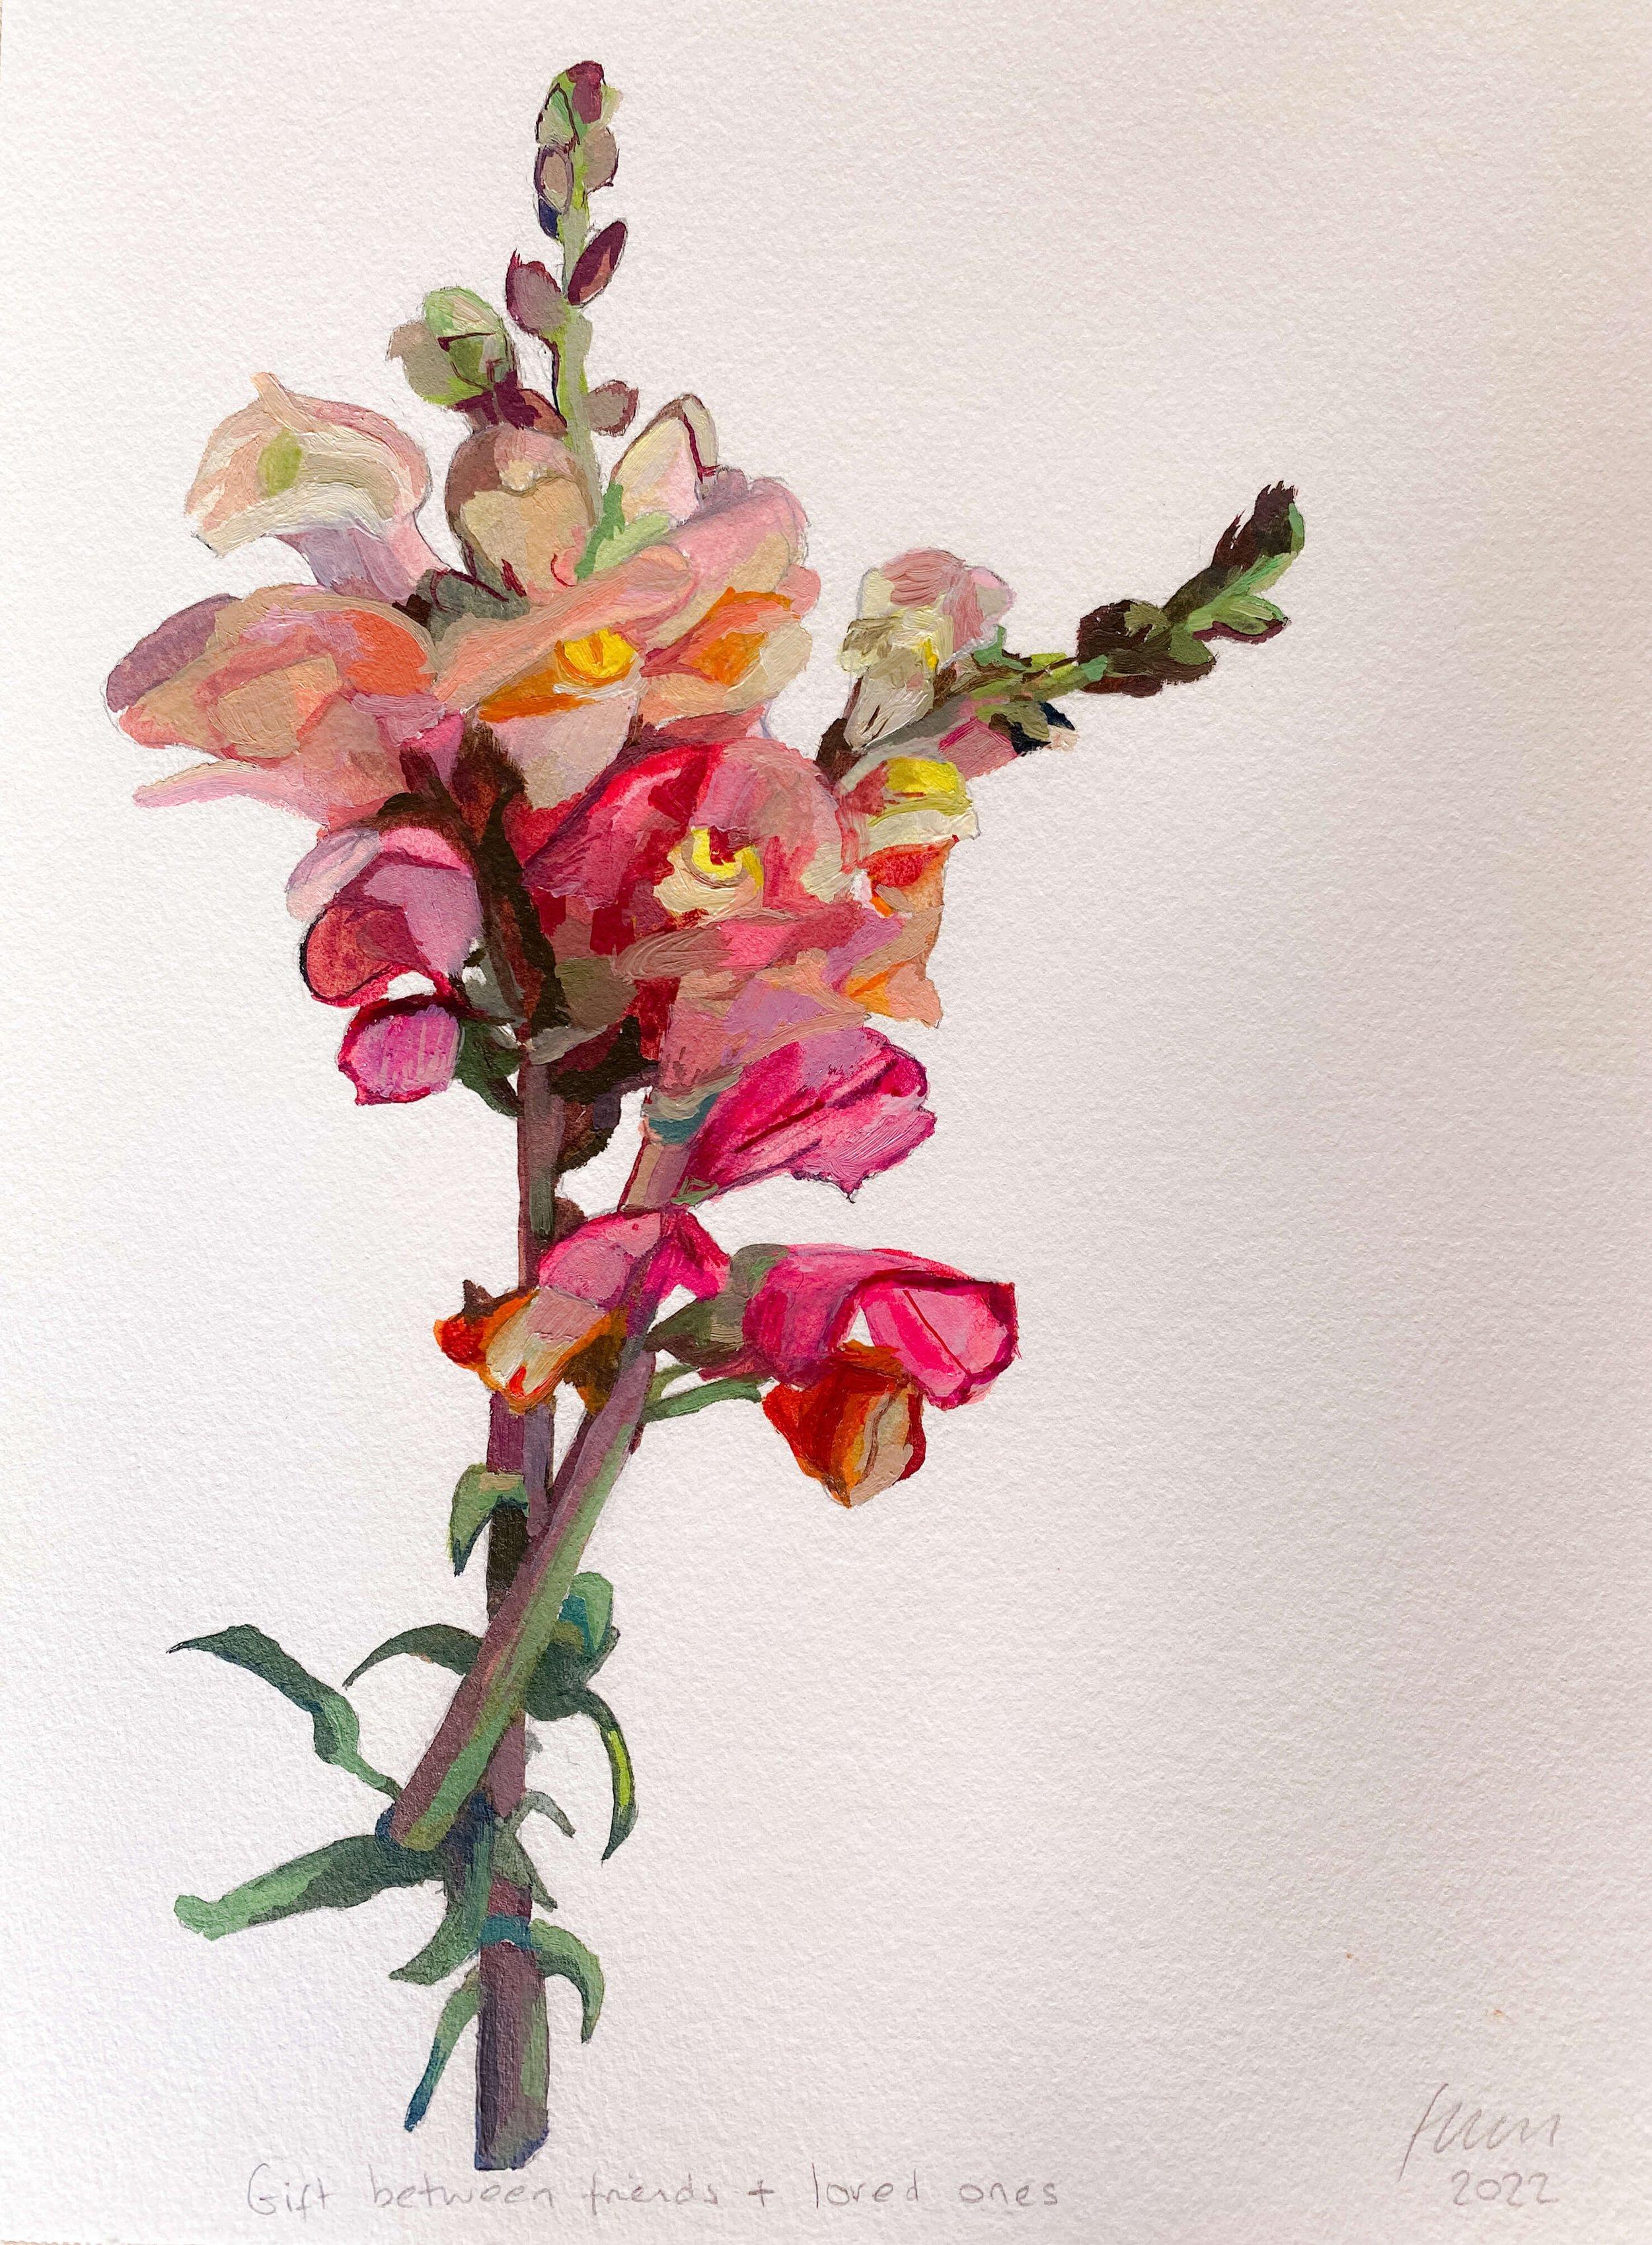 Freny Green | Artist | Oil paintings for sale | Colombia | Bogota | Paloquemao | Flower market | Art for the home | Botanical art | Floral art | Oil paintings 30cm x 20cm | Snapdragons